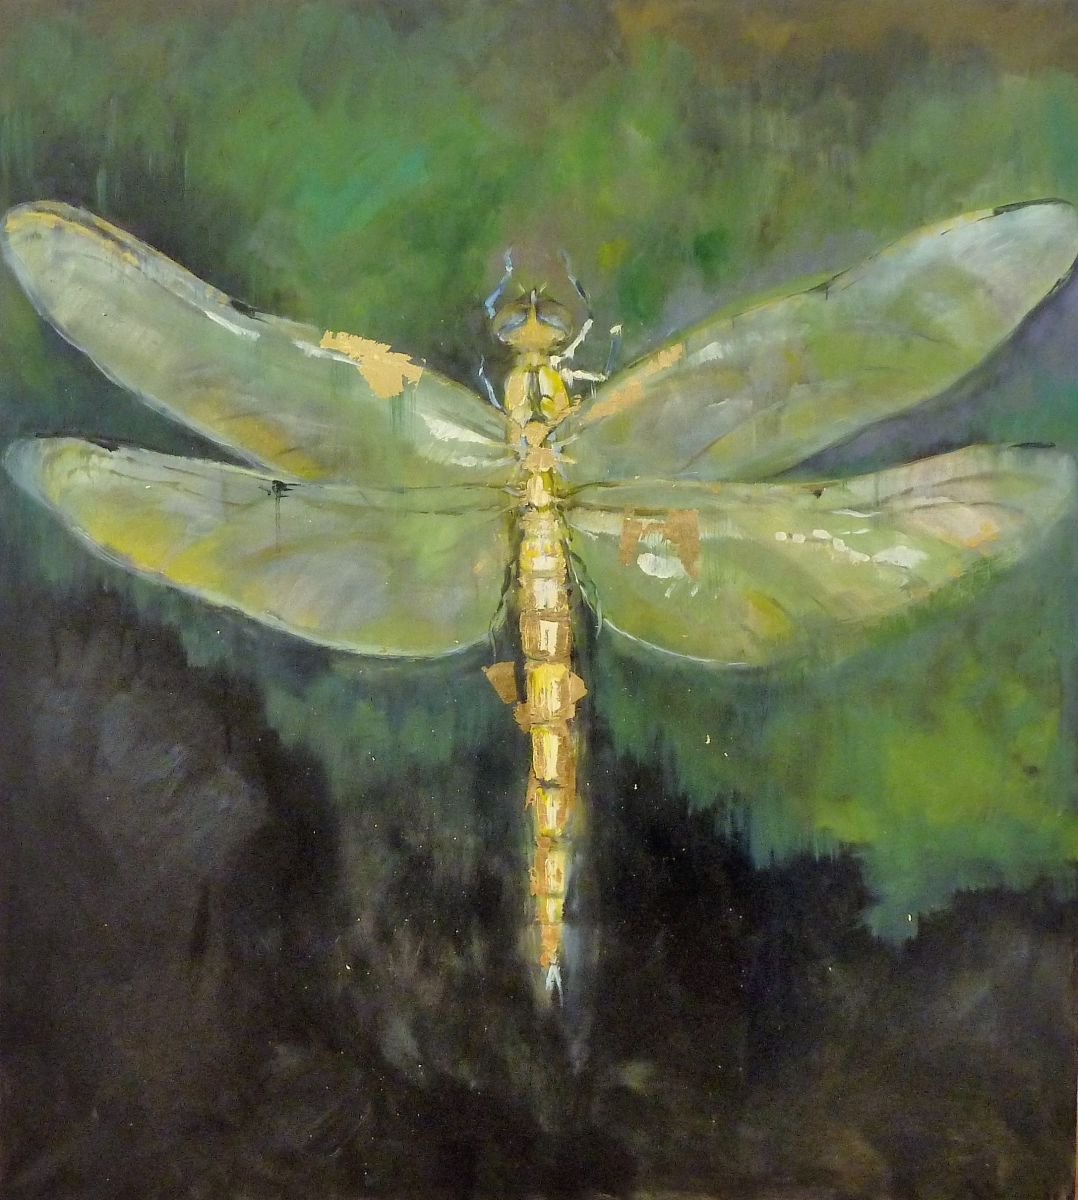 Dragonfly by Laura Beatrice Gerlini